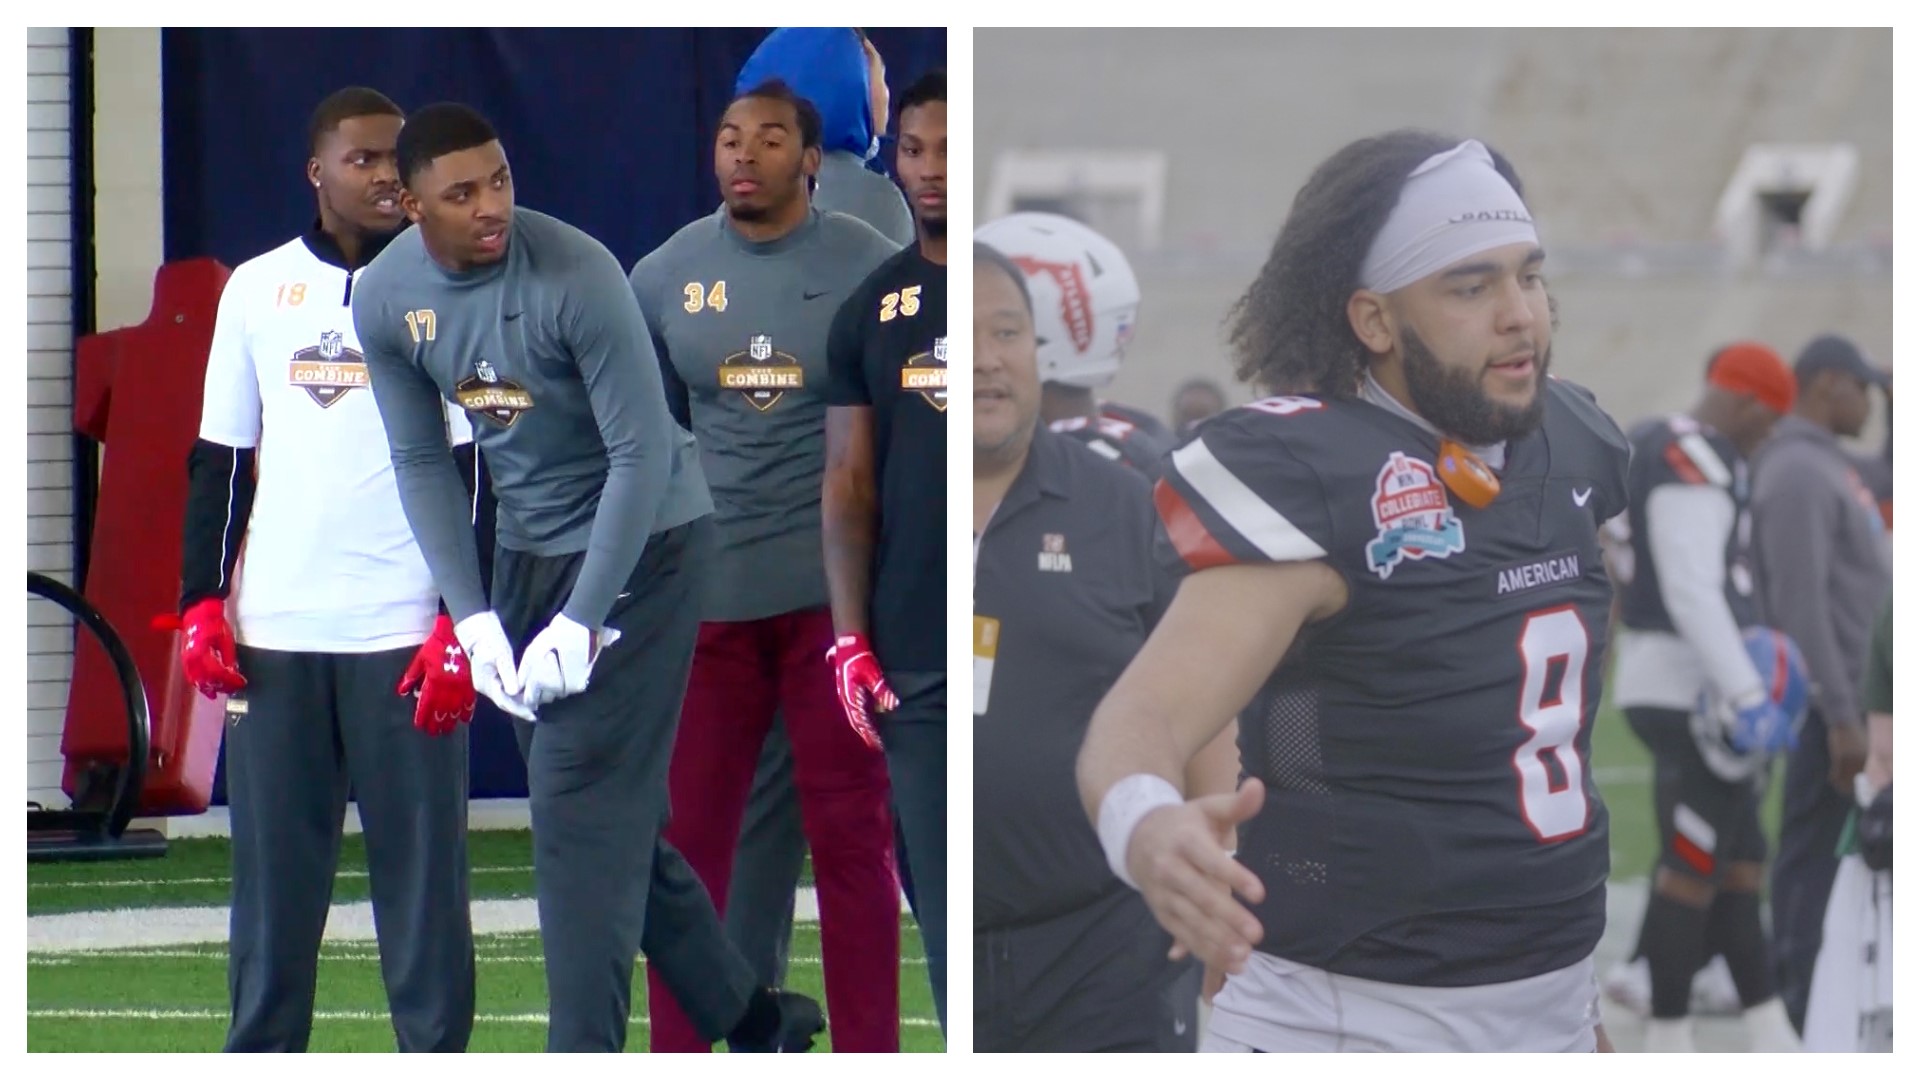 Former Alabama A&M football standouts Aqeel Glass and Dee Anderson received invites to the Bucs and Saints rookie mini camps respectively.